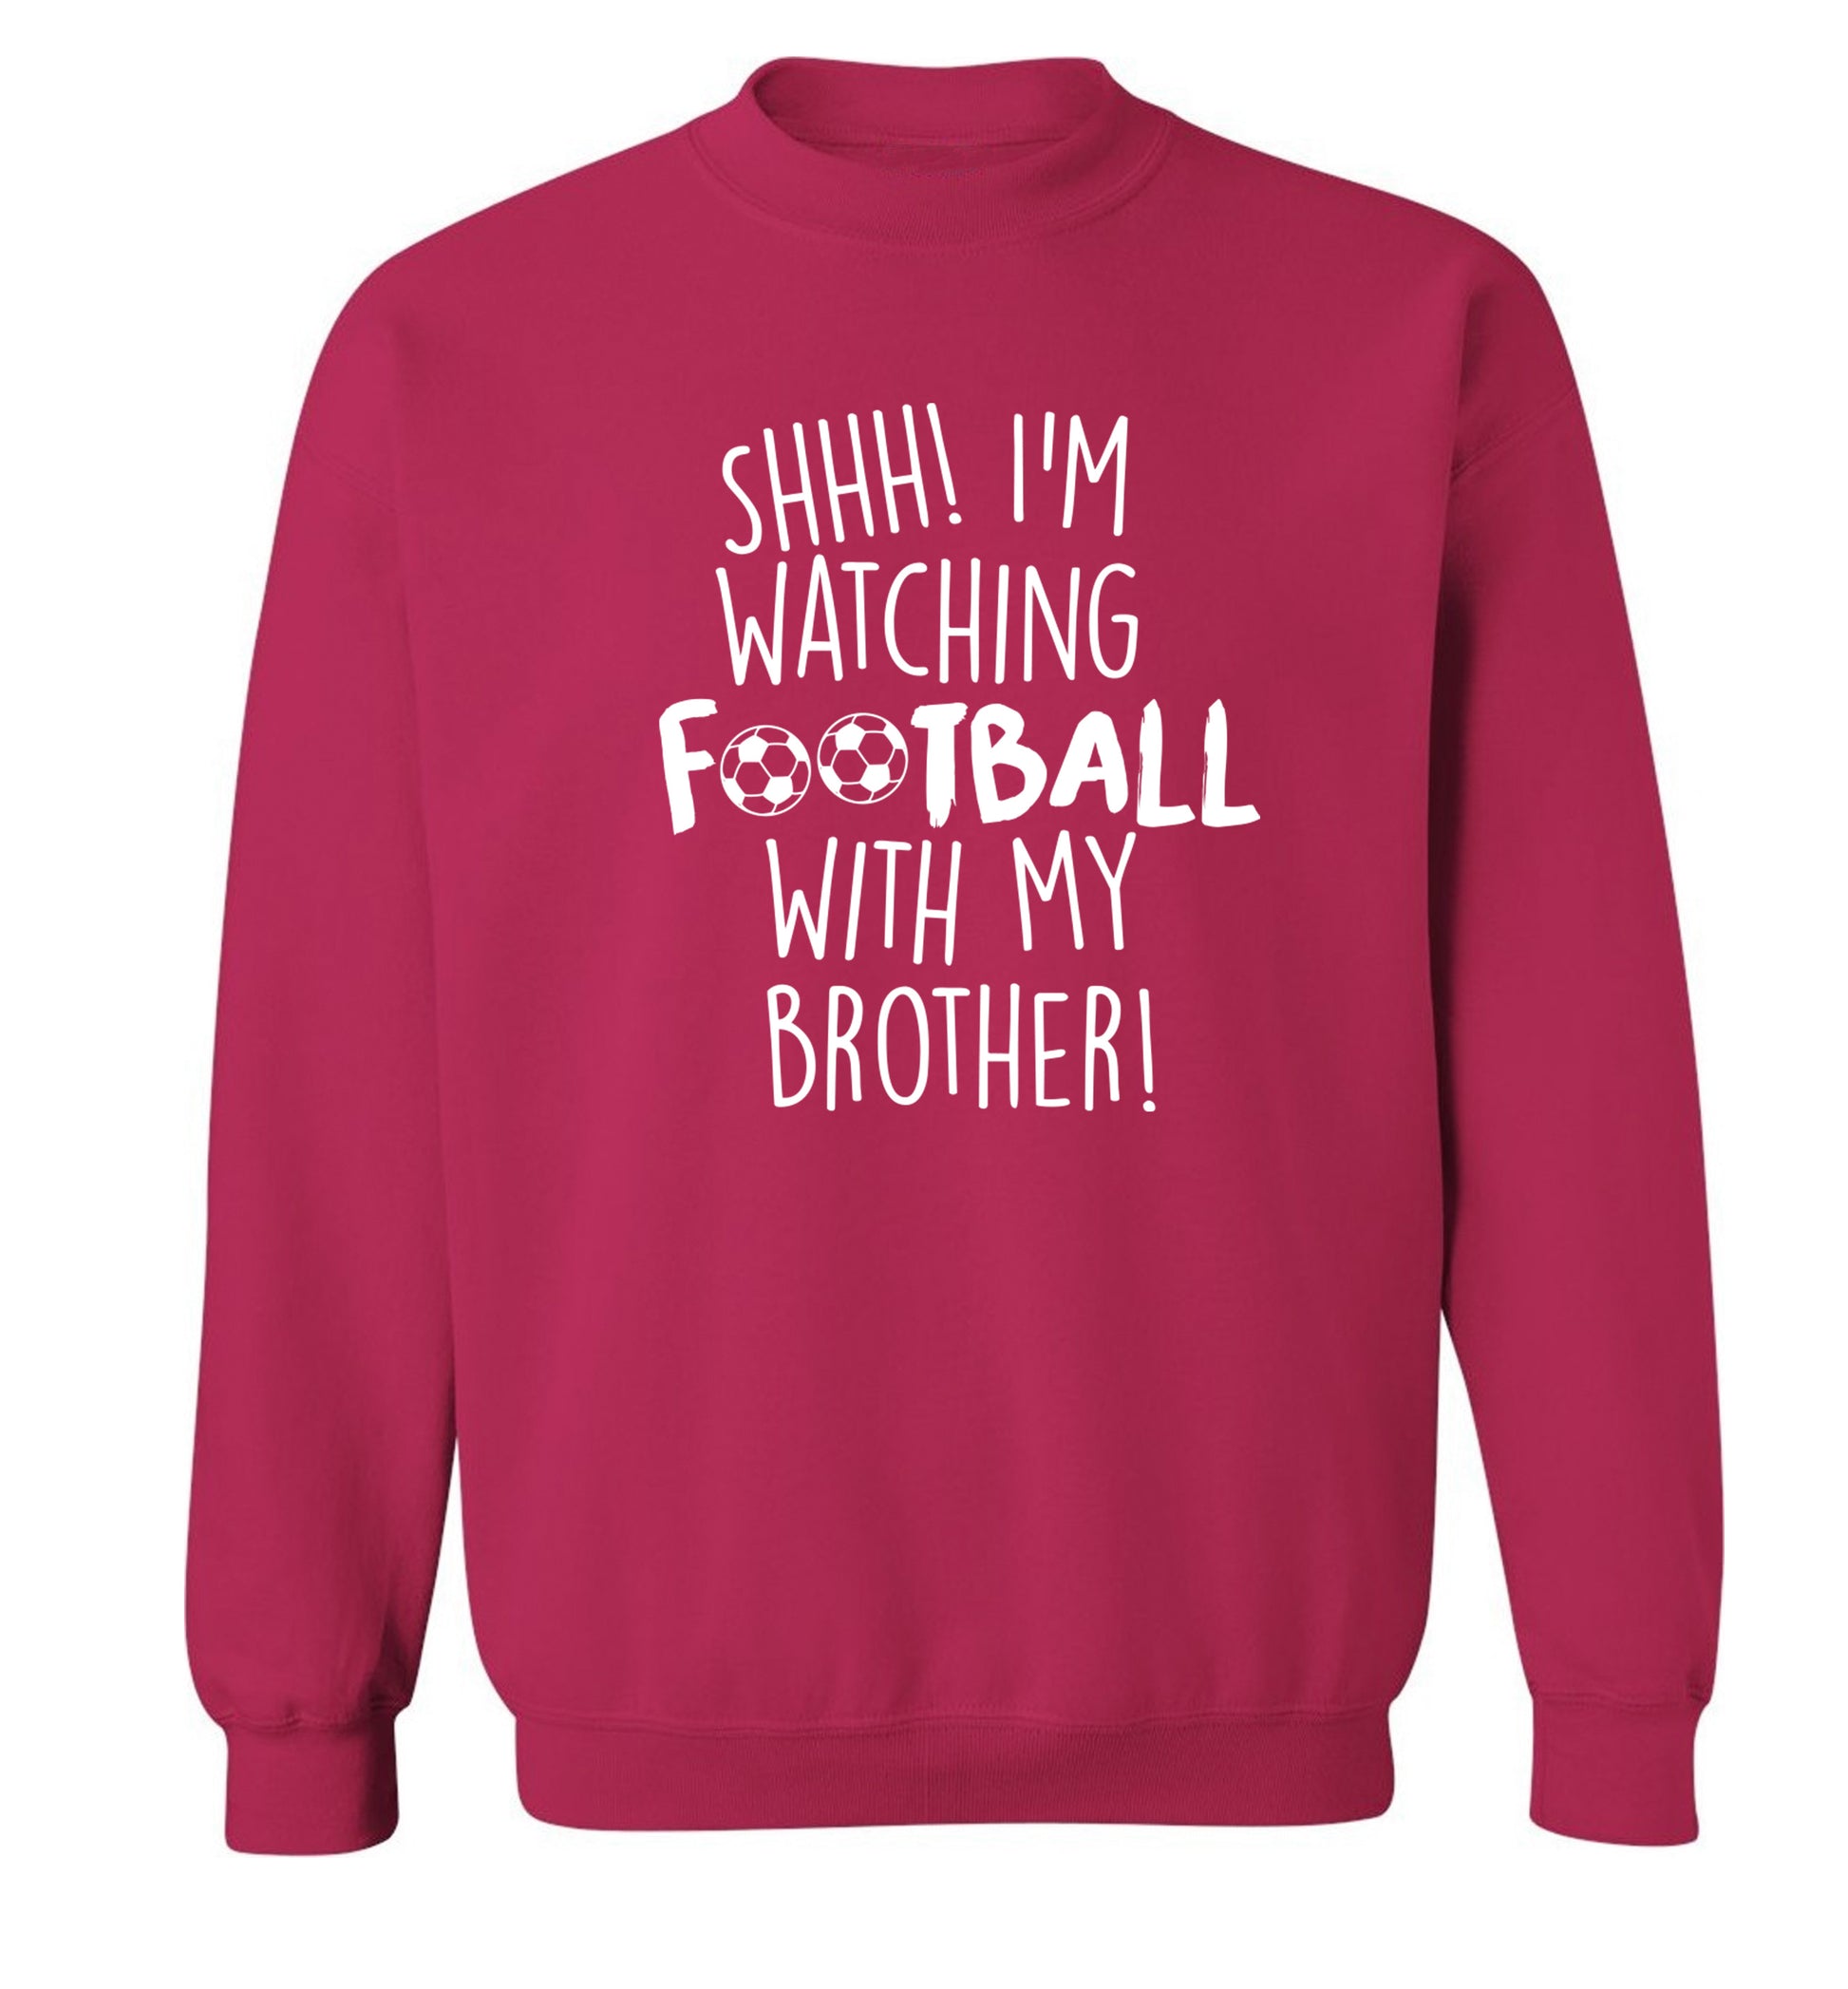 Shhh I'm watching football with my brother Adult's unisexpink Sweater 2XL